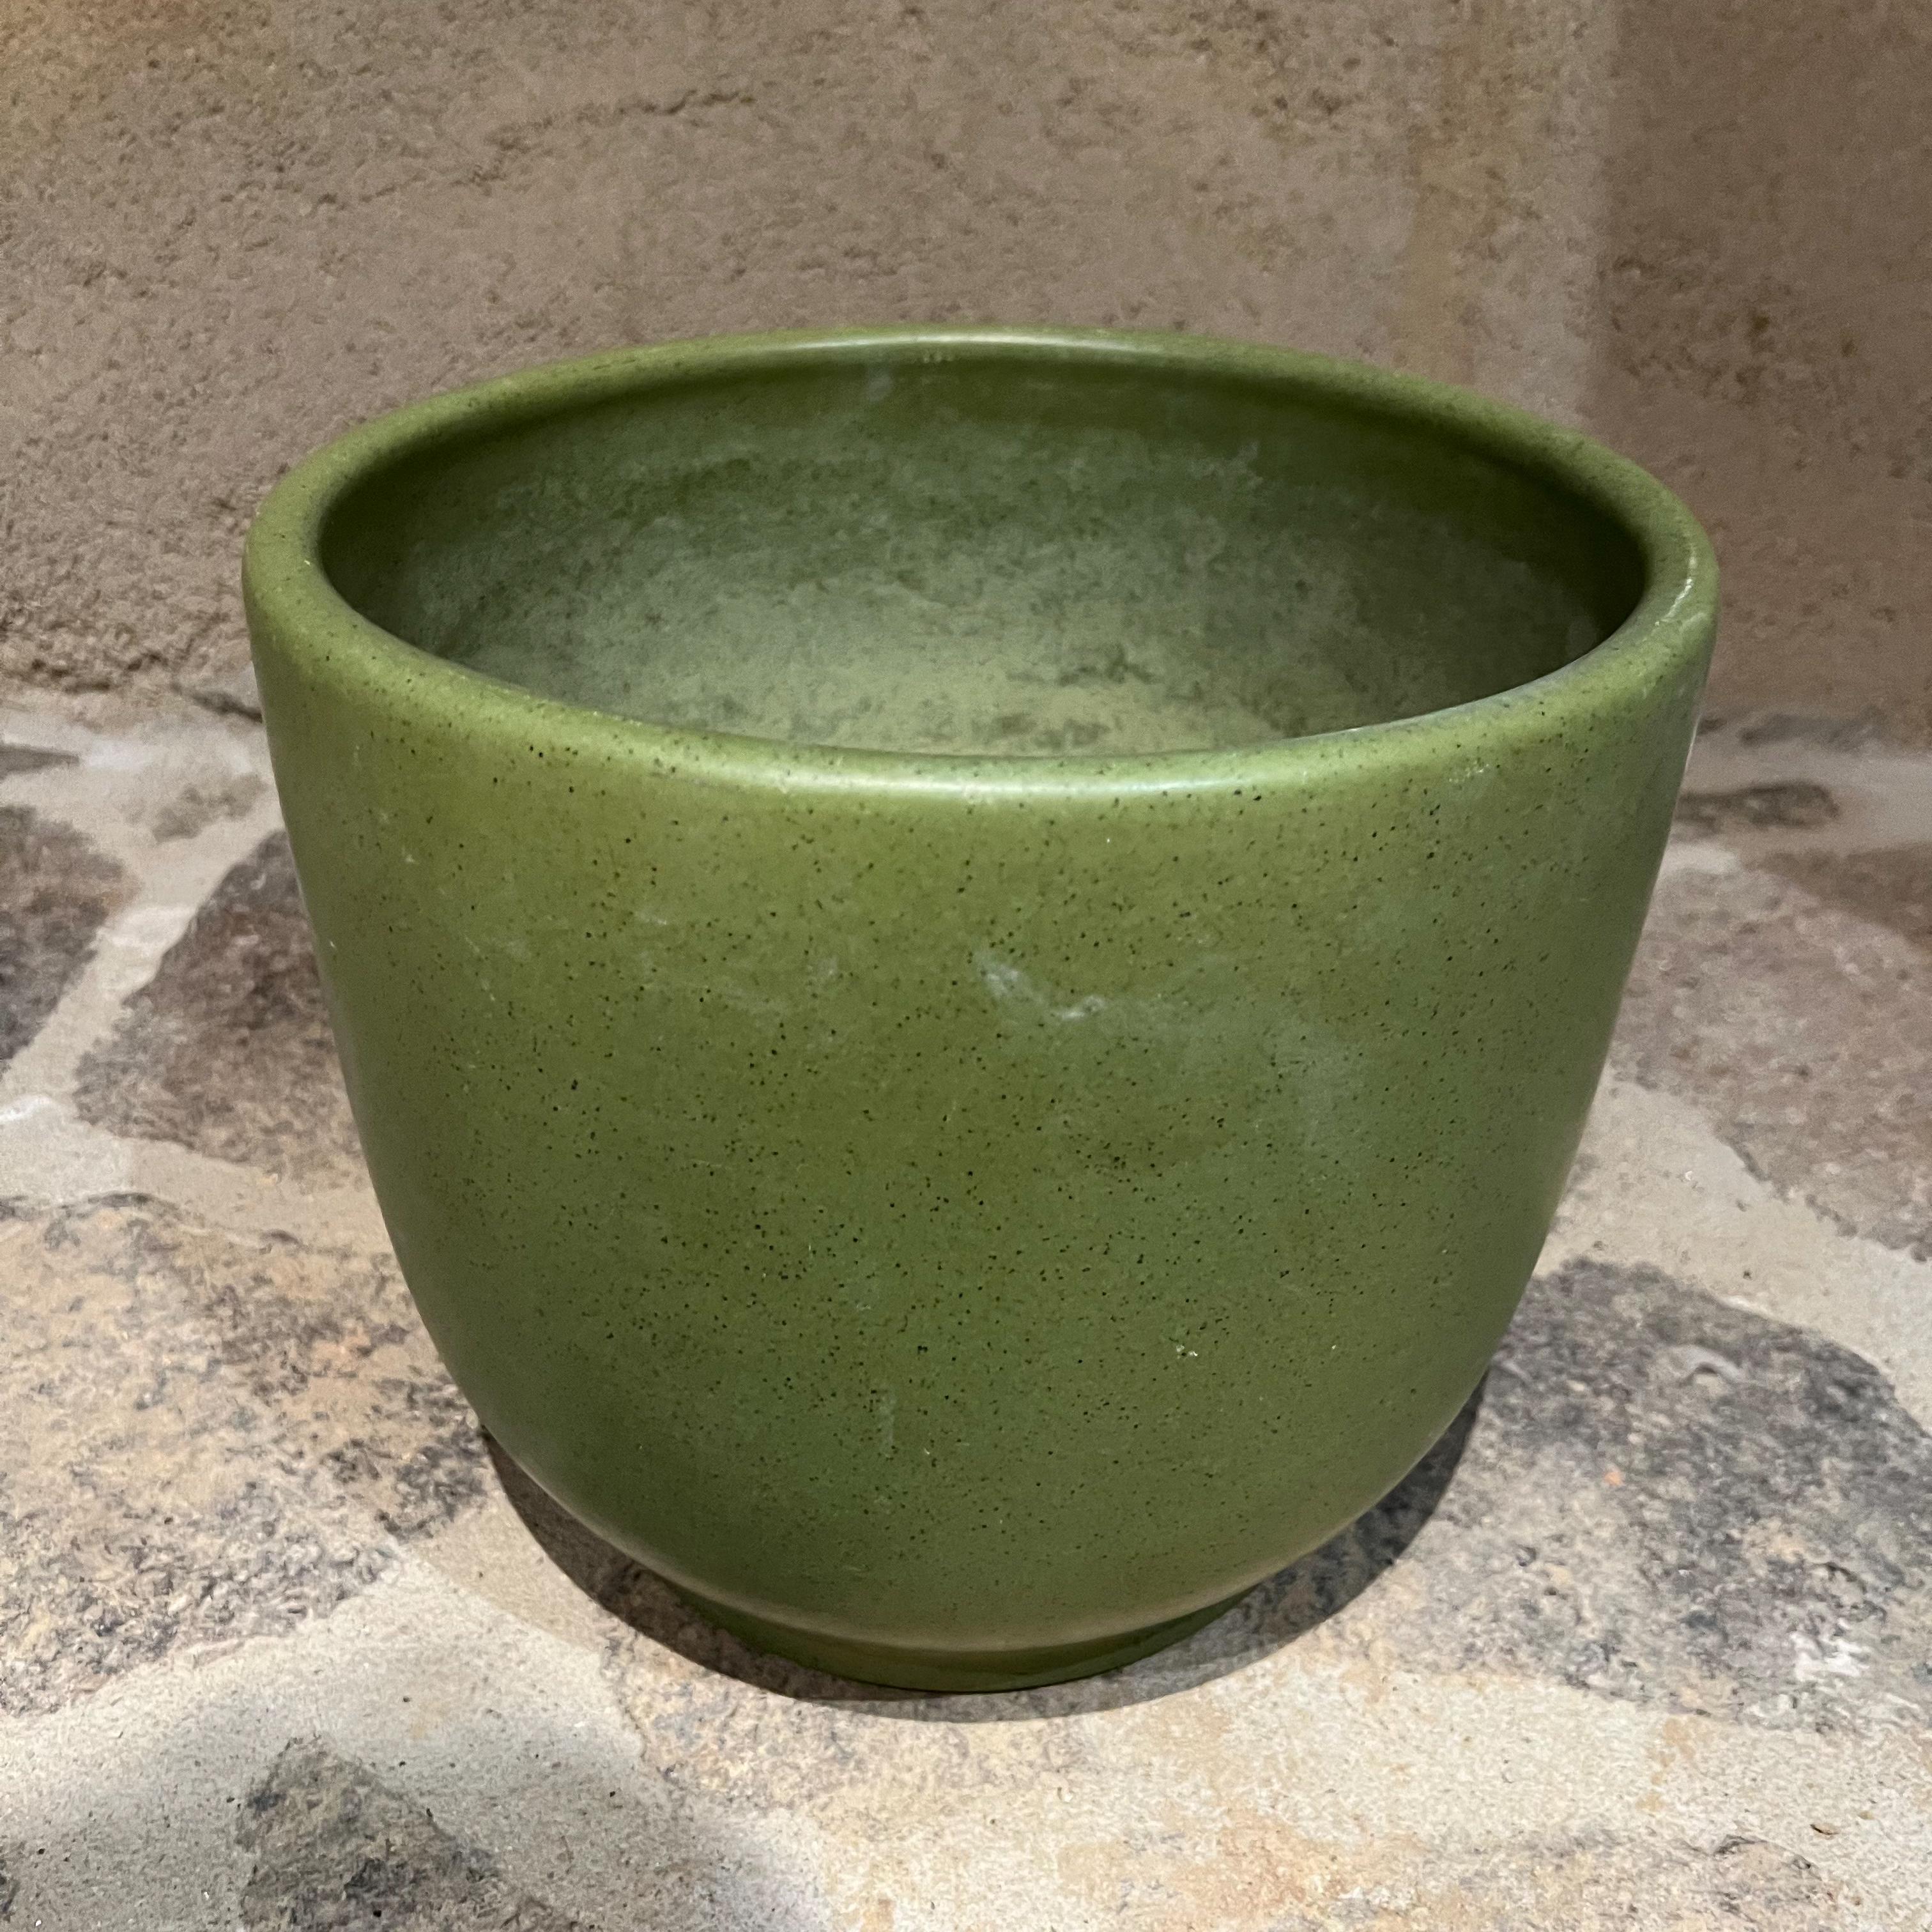 1960s Modern Gainey Pottery sculptural midcentury green Planter Pot
(Listing is for the planter only)
By Gainey Ceramics Pottery La Verne, California, stamp by maker present.
Fabulous color
9 tall x 10.75 diameter
Preowned unrestored vintage